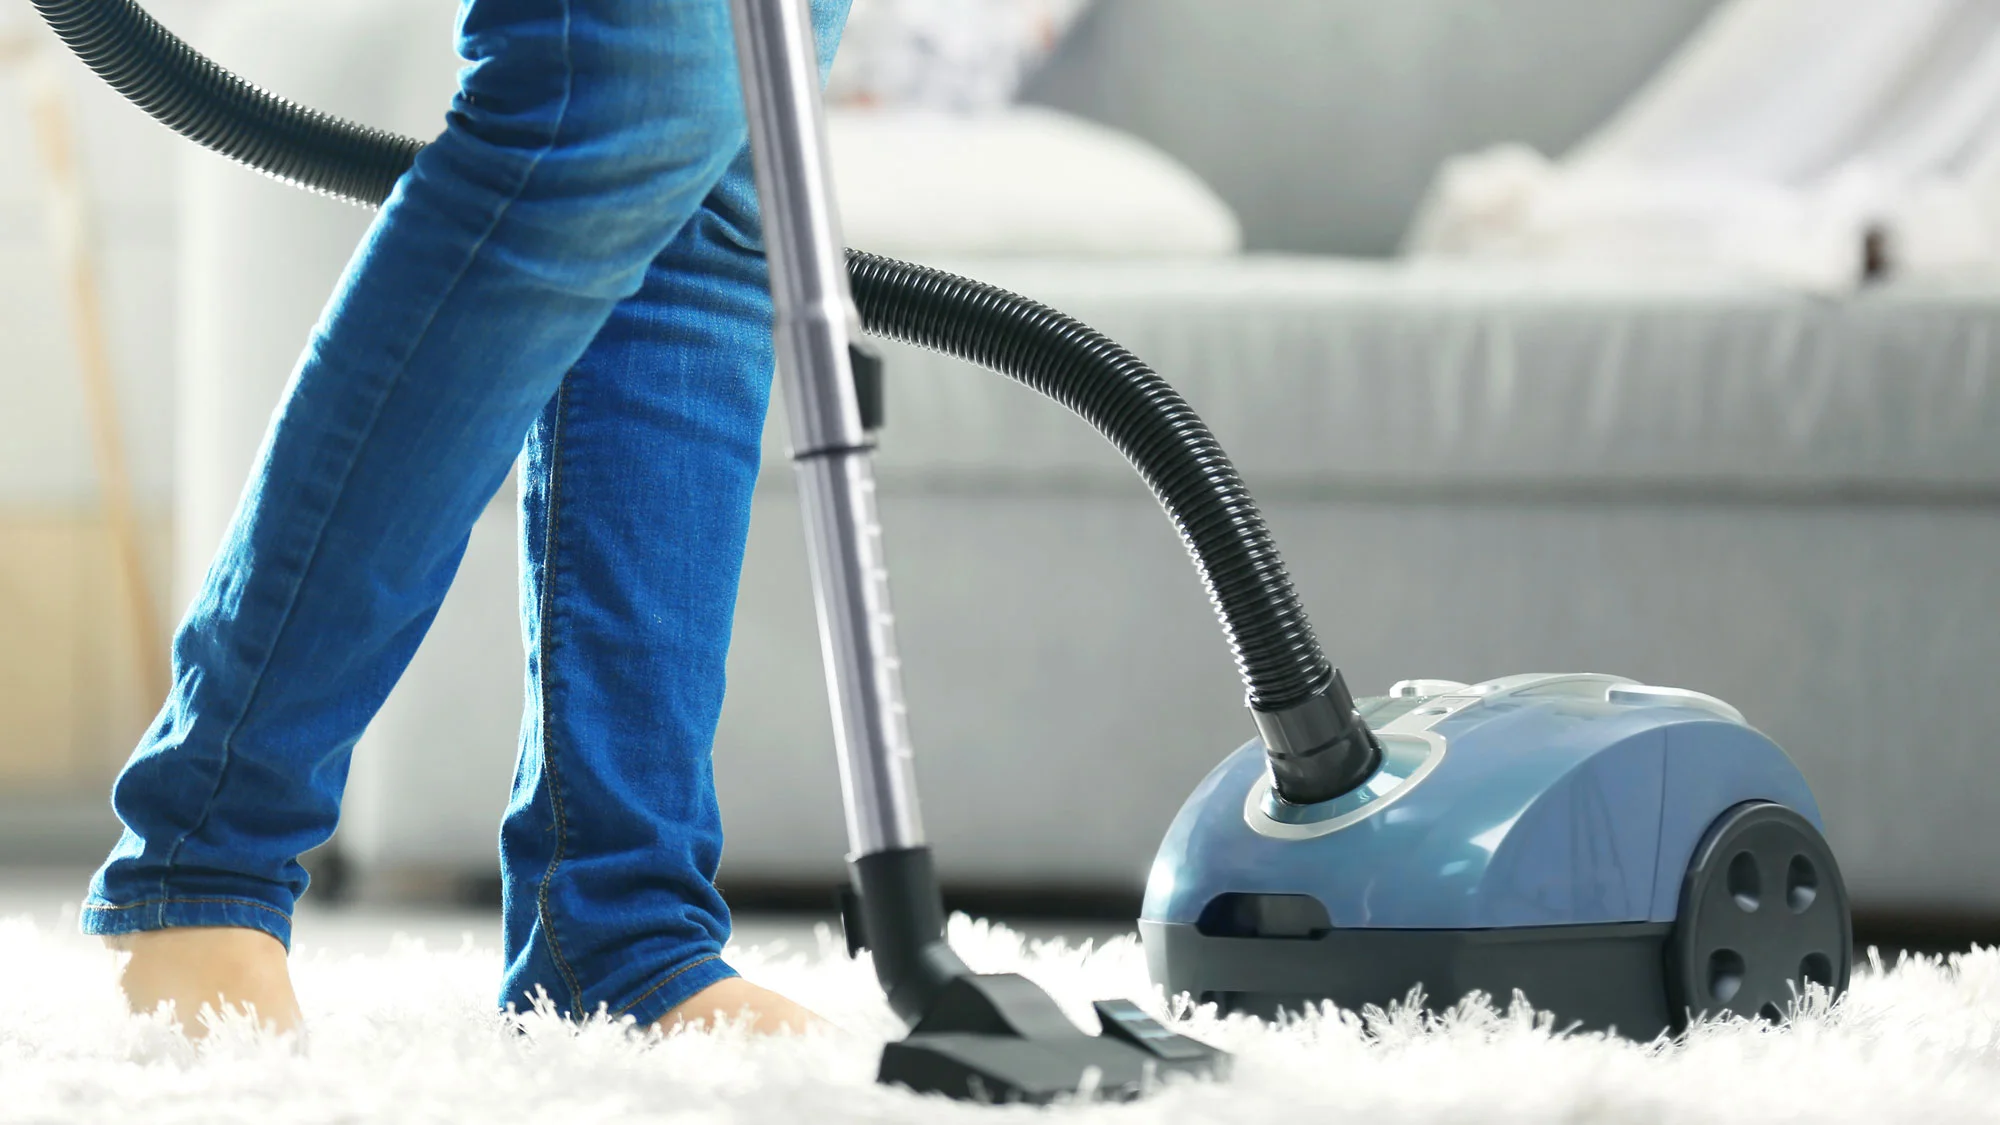 Best Carpet Cleaning Companies In Your Area